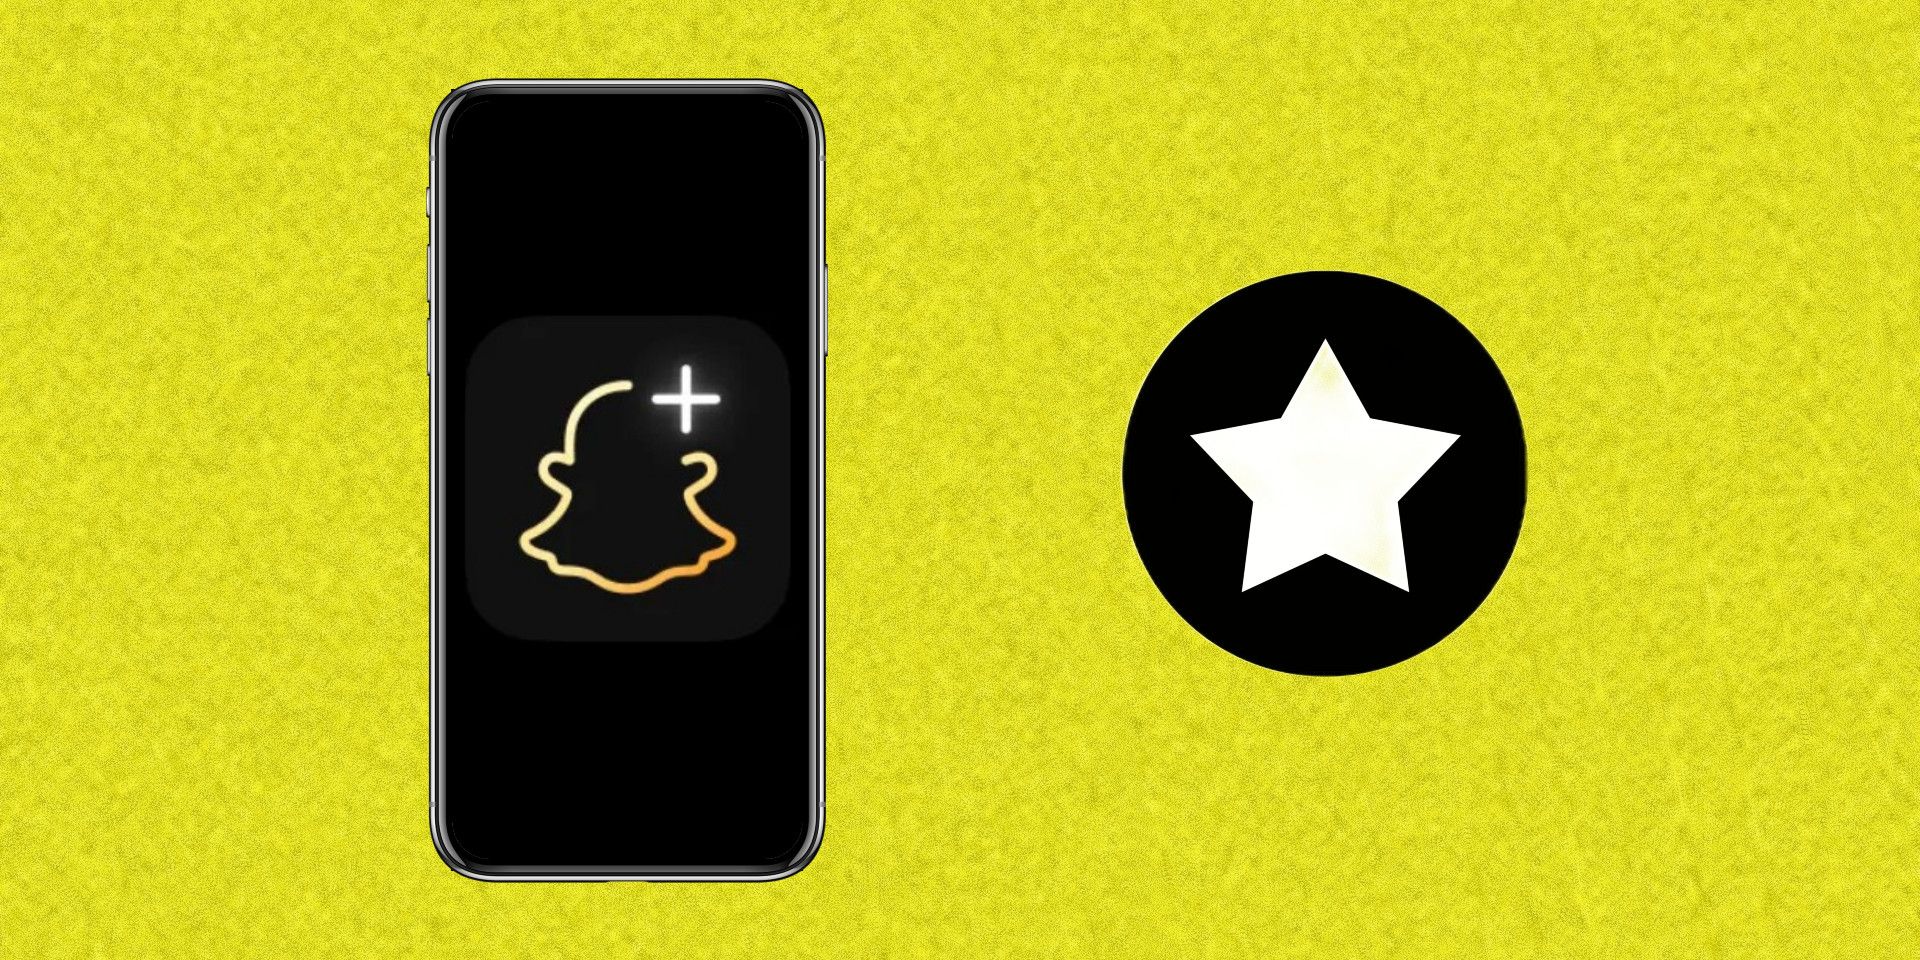 Snapchat+: How to Choose Your Post View Emoji